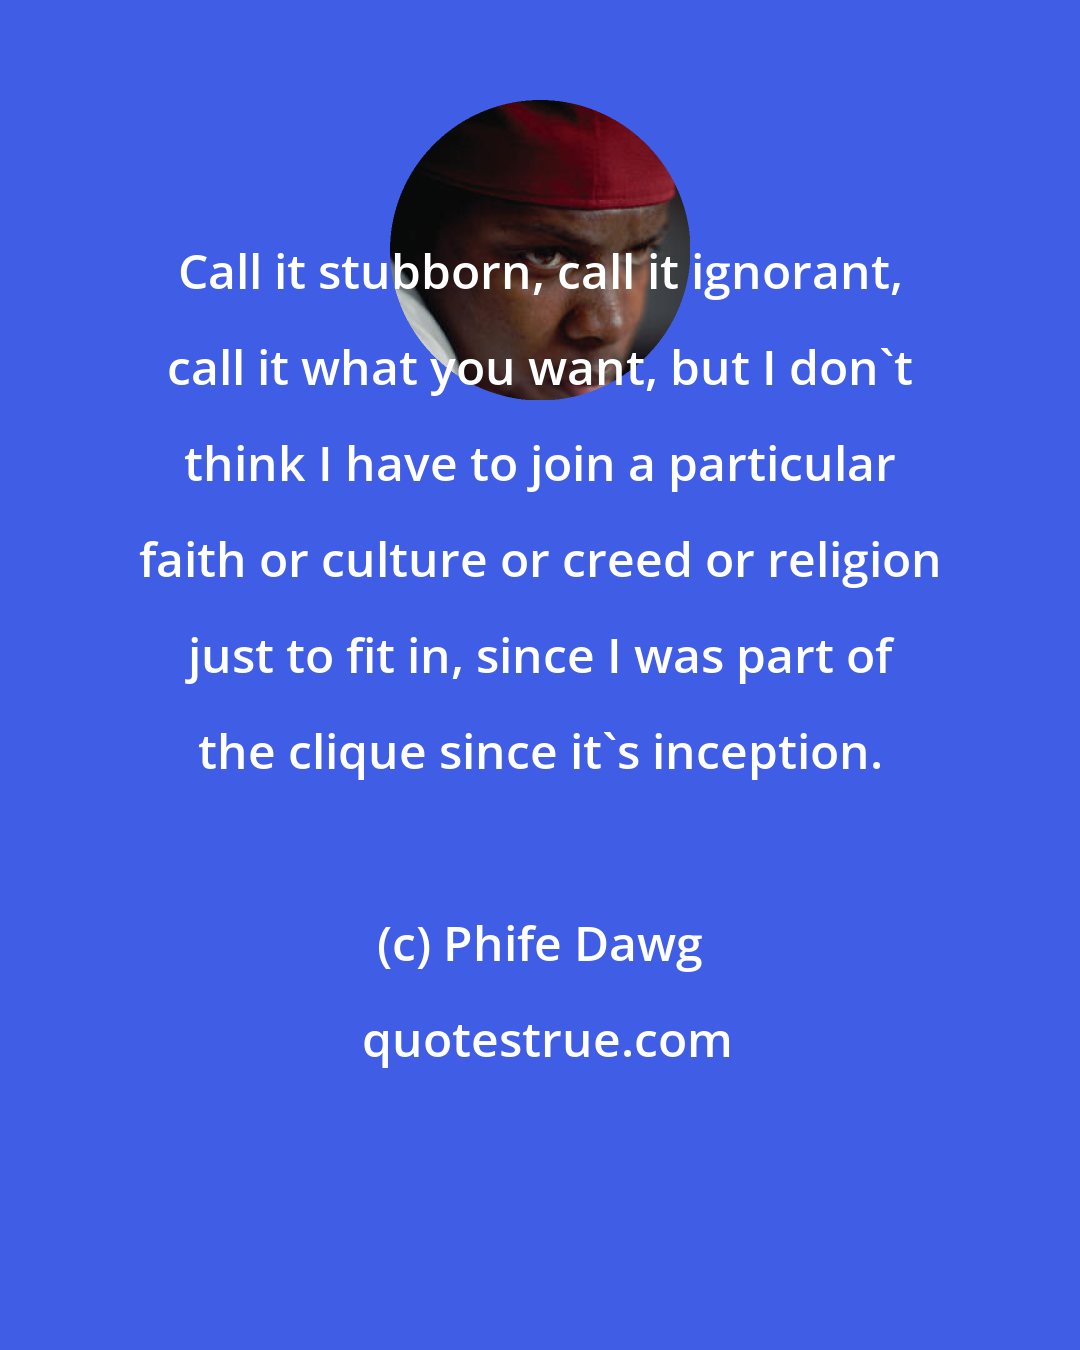 Phife Dawg: Call it stubborn, call it ignorant, call it what you want, but I don't think I have to join a particular faith or culture or creed or religion just to fit in, since I was part of the clique since it's inception.